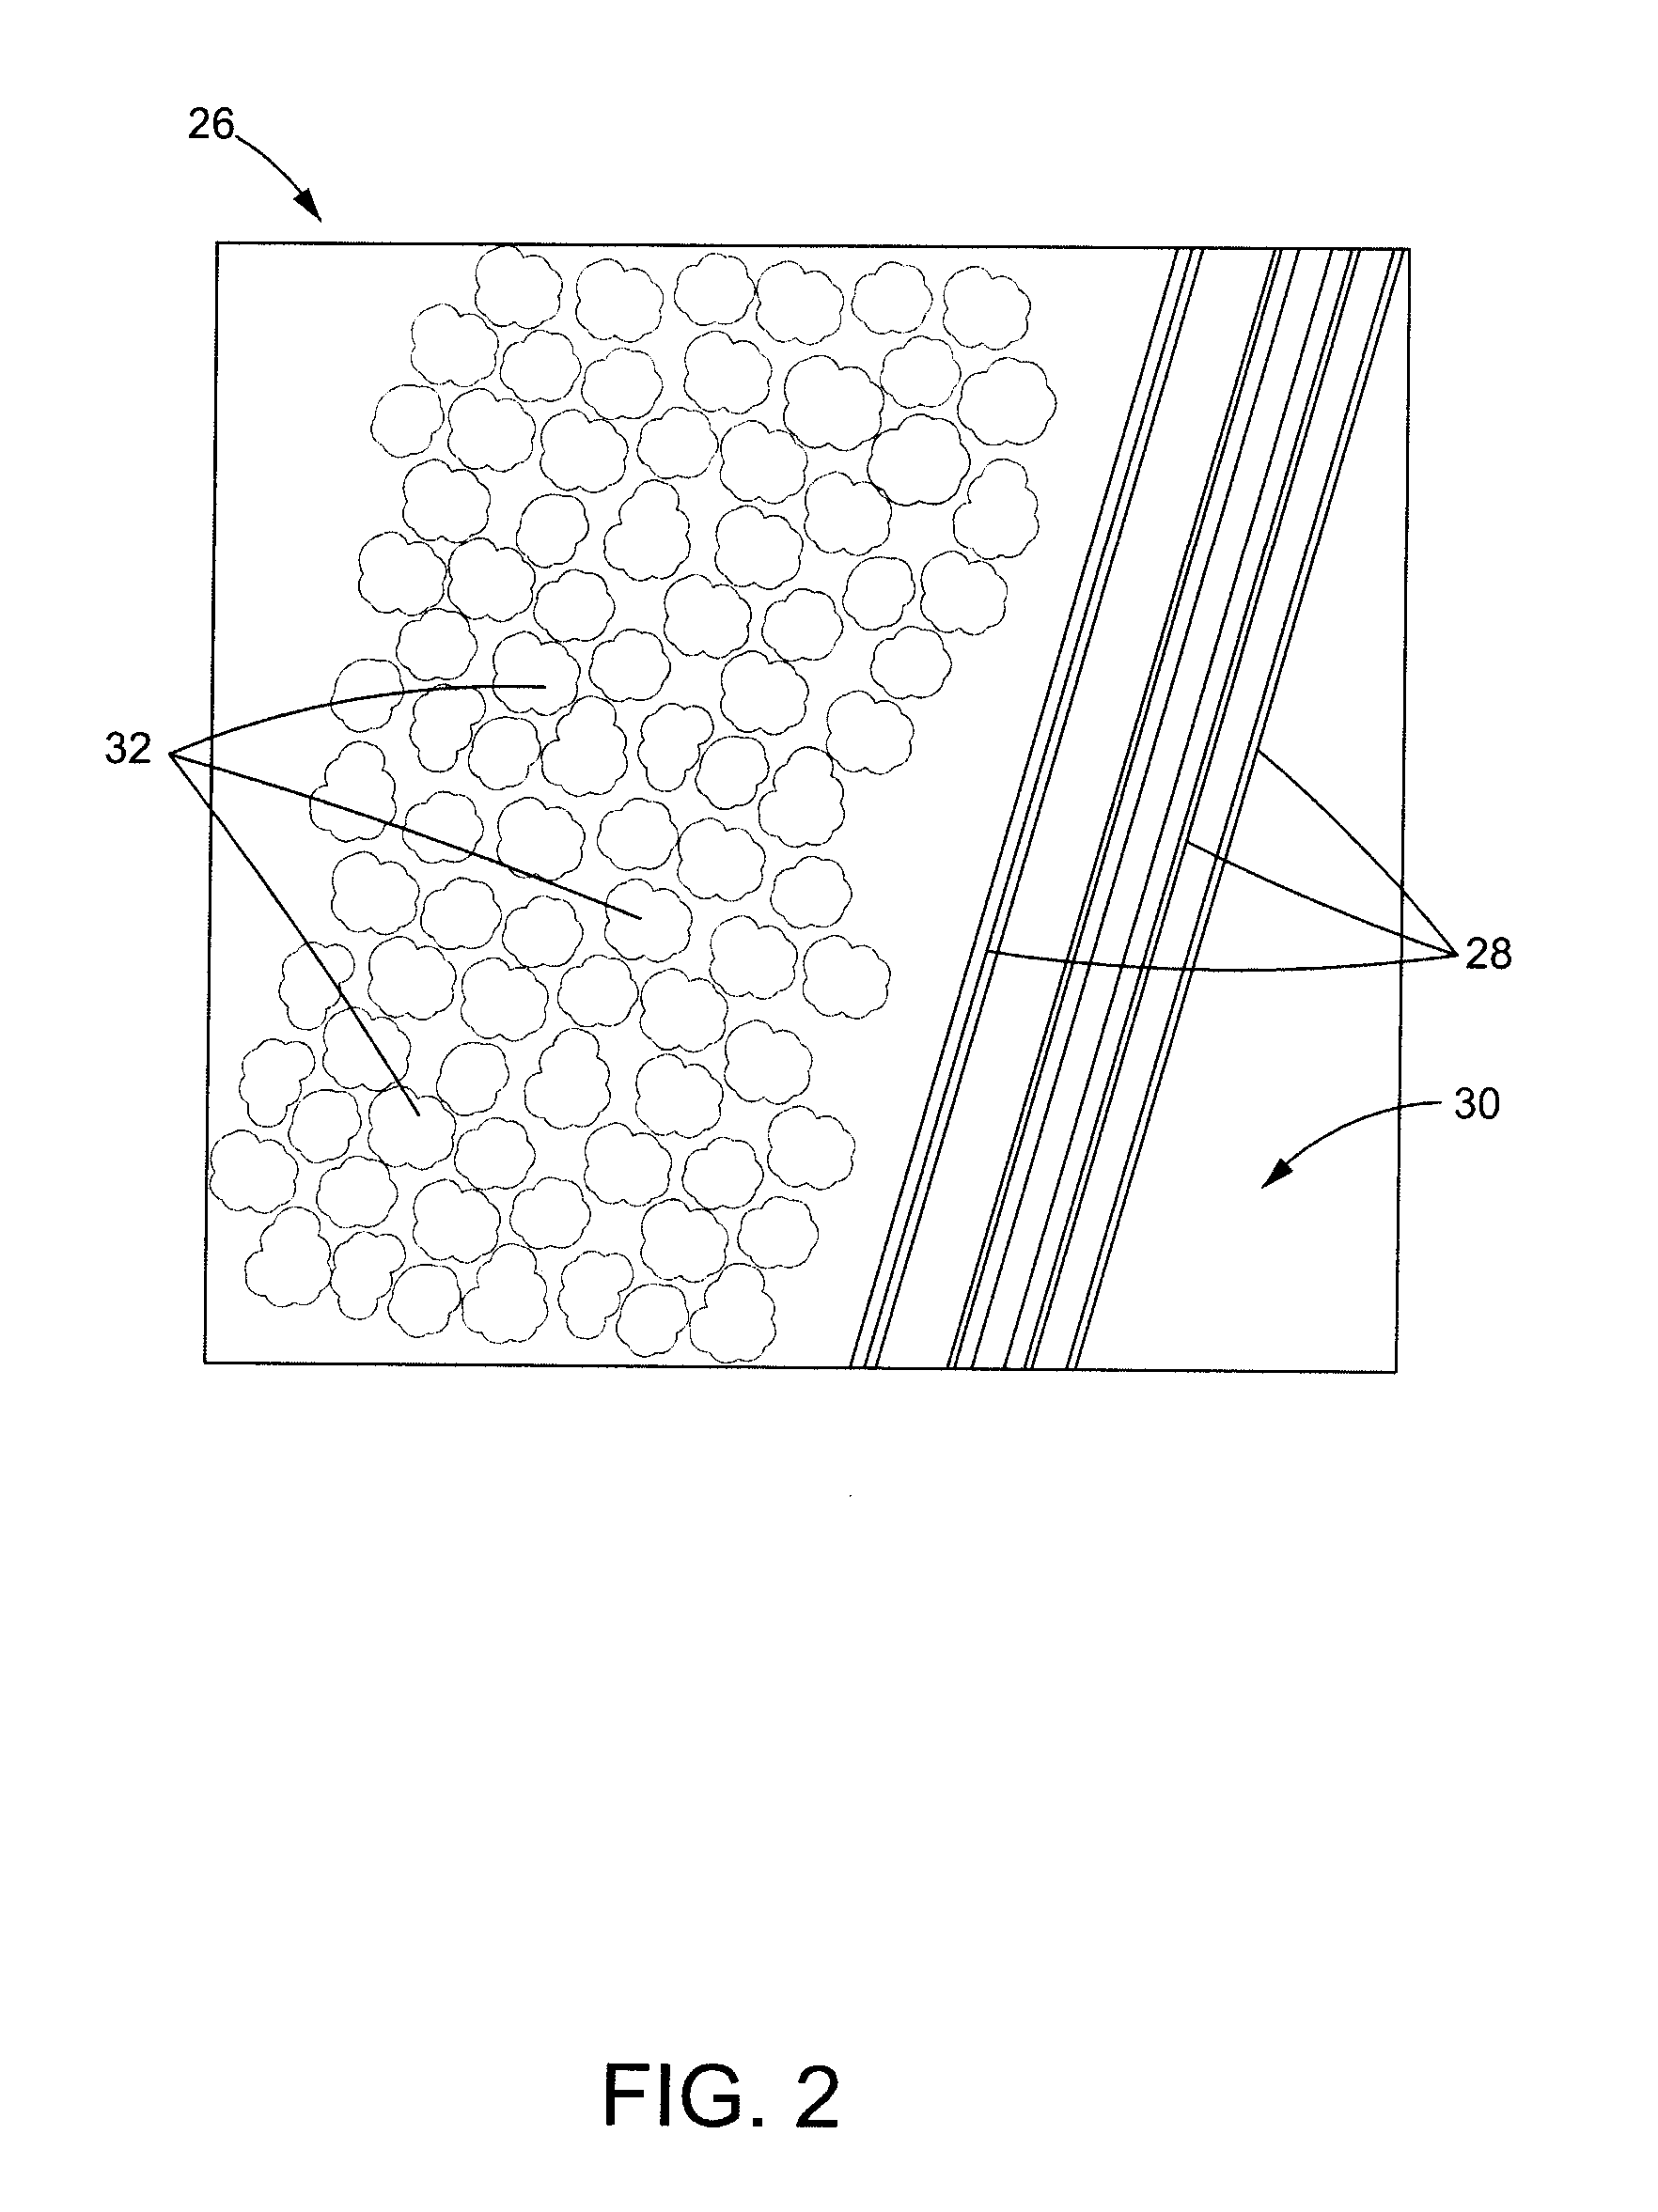 Method for locating vegetation having a potential to impact a structure